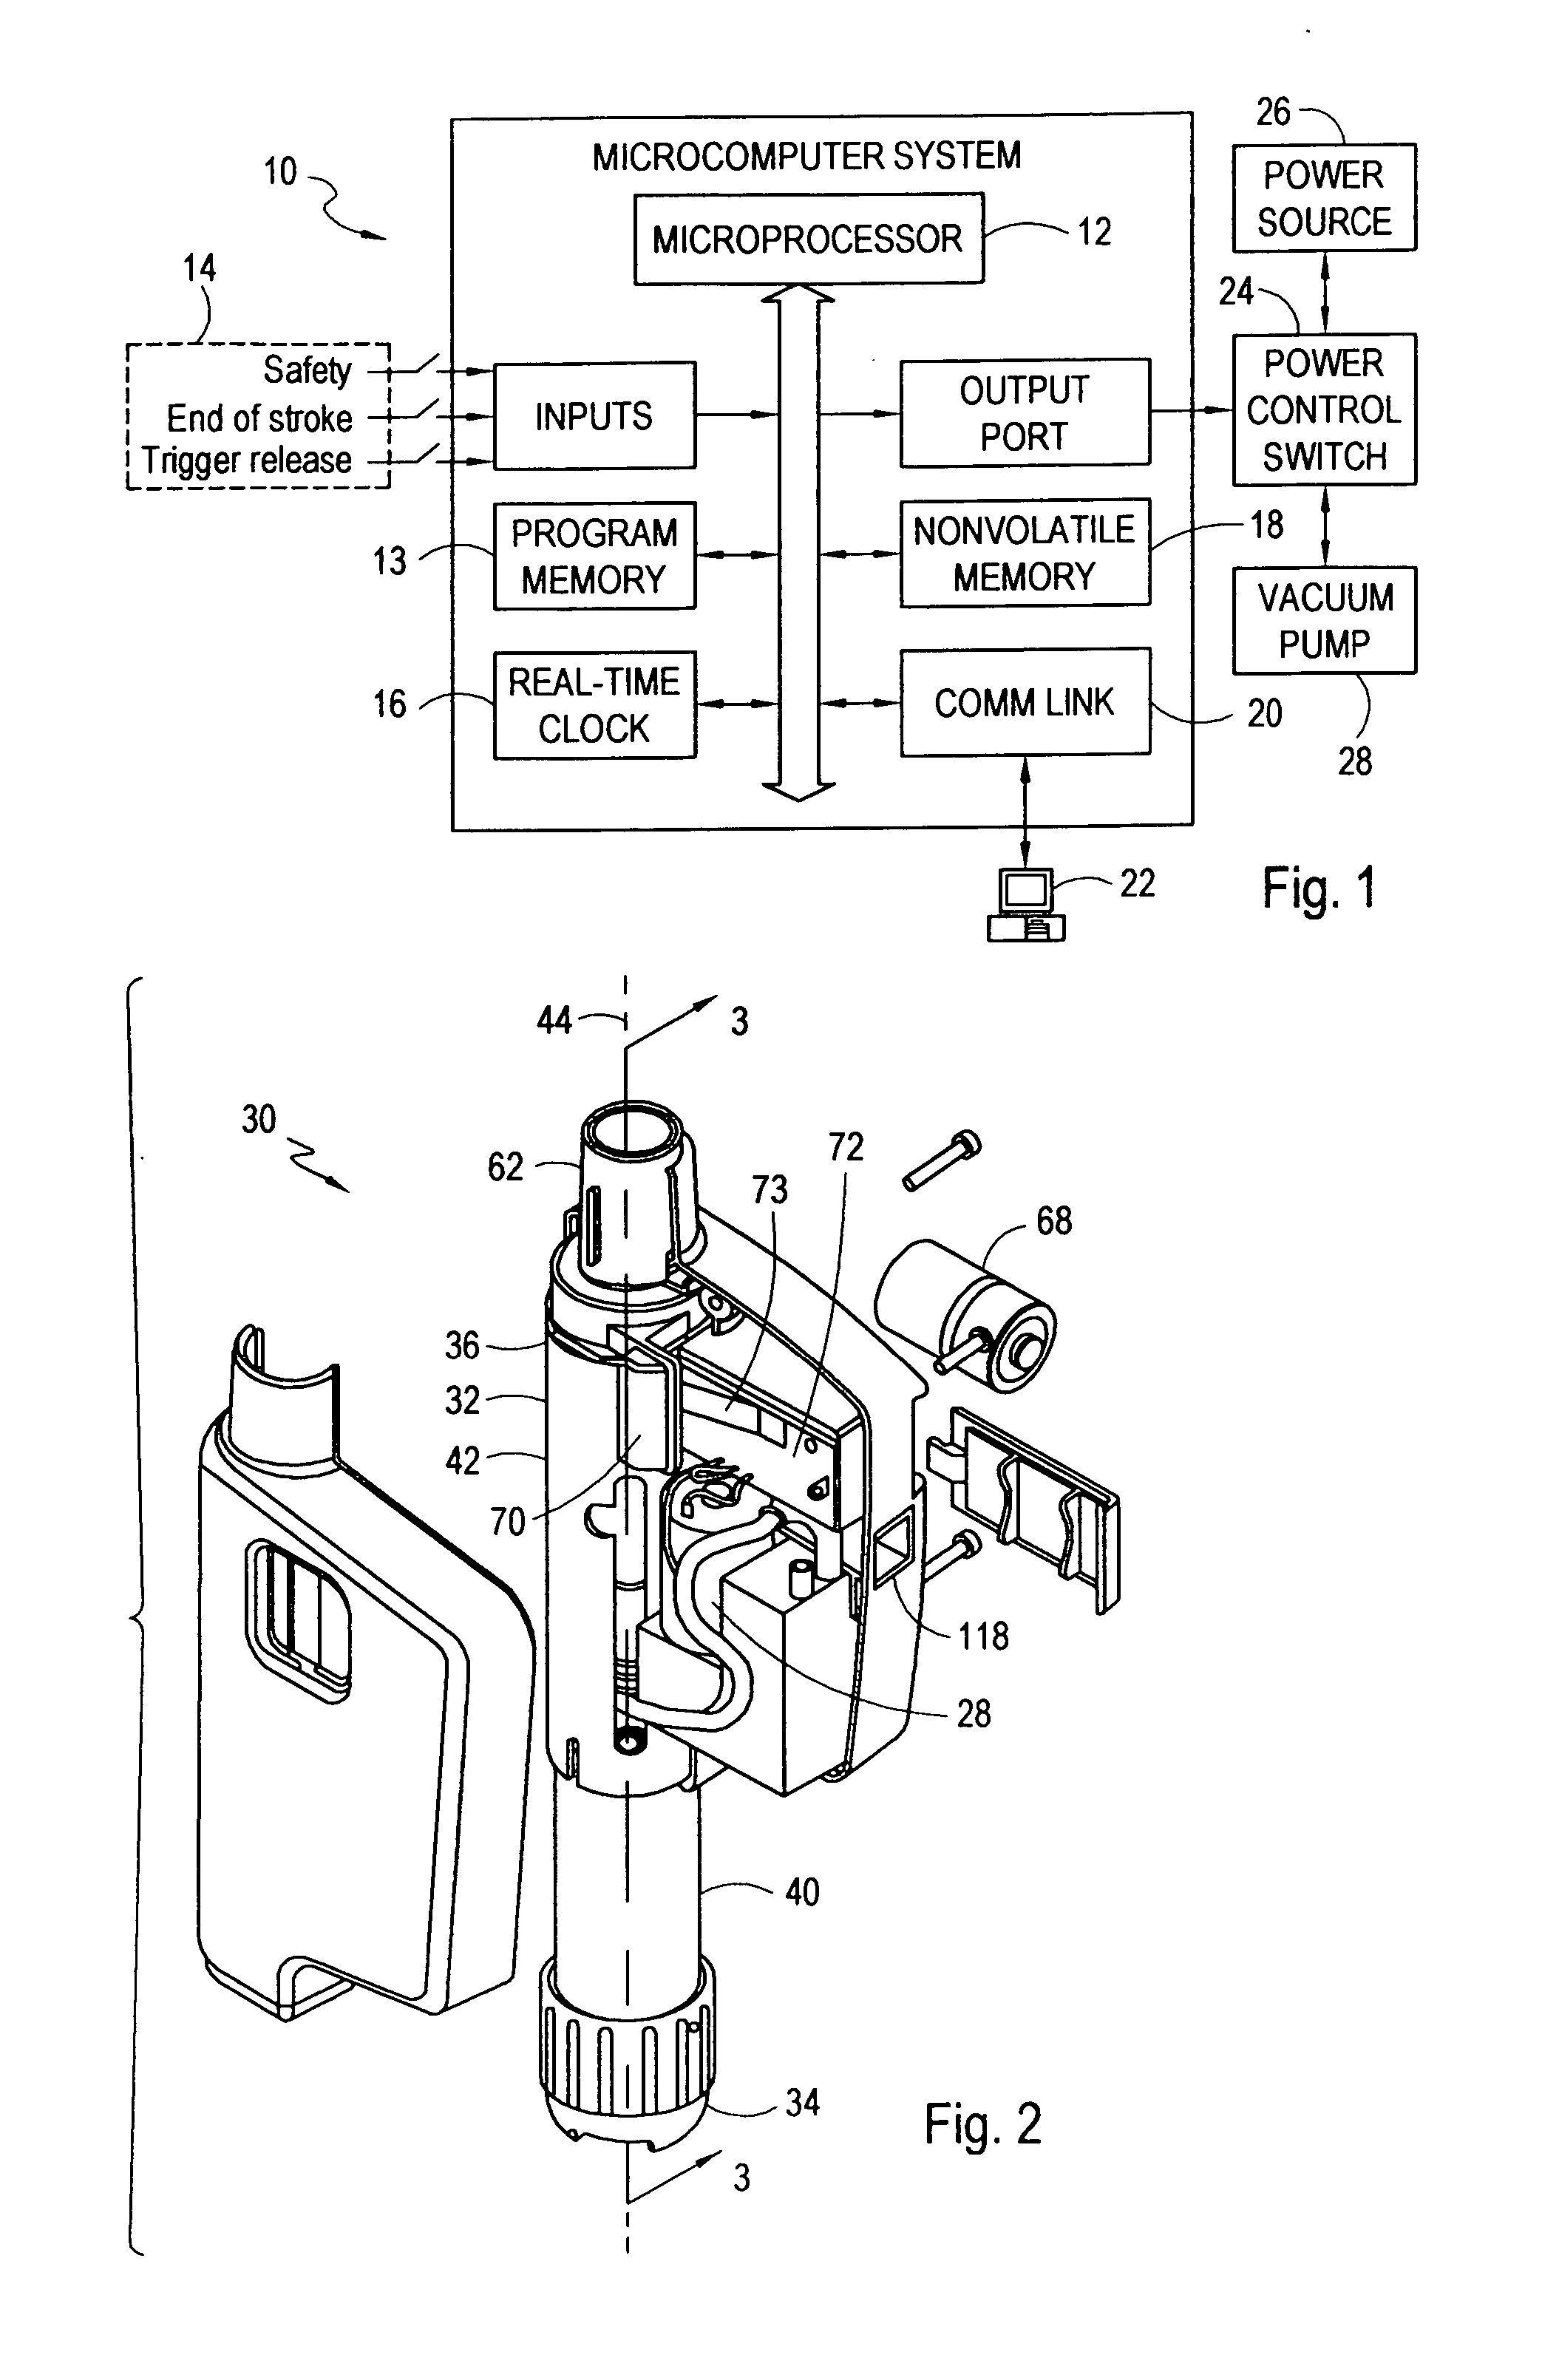 Jet injector with data logging system for use in compliance and dose monitoring programs